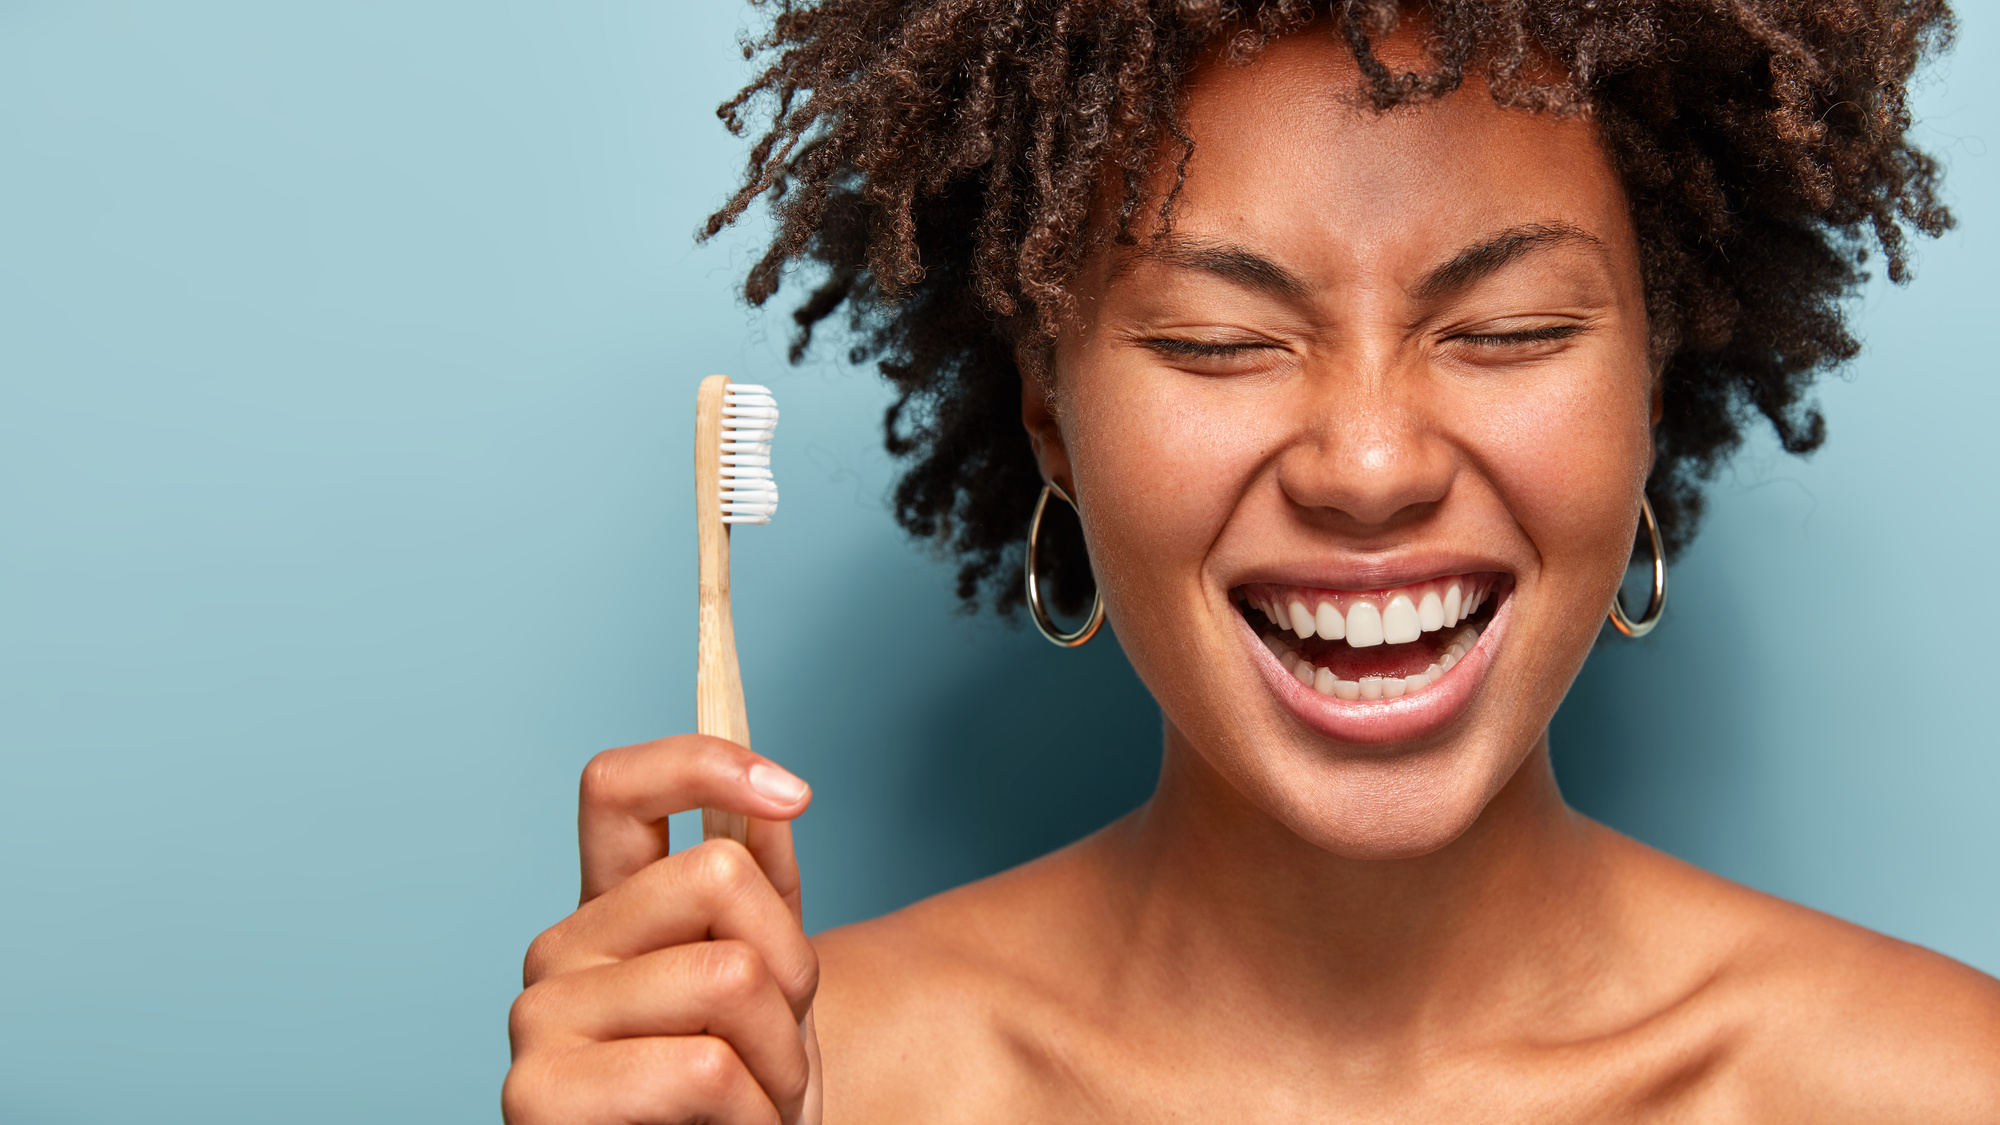 Happy smiling woman with curly hair laughs and shows bright smile while holding toothbrush